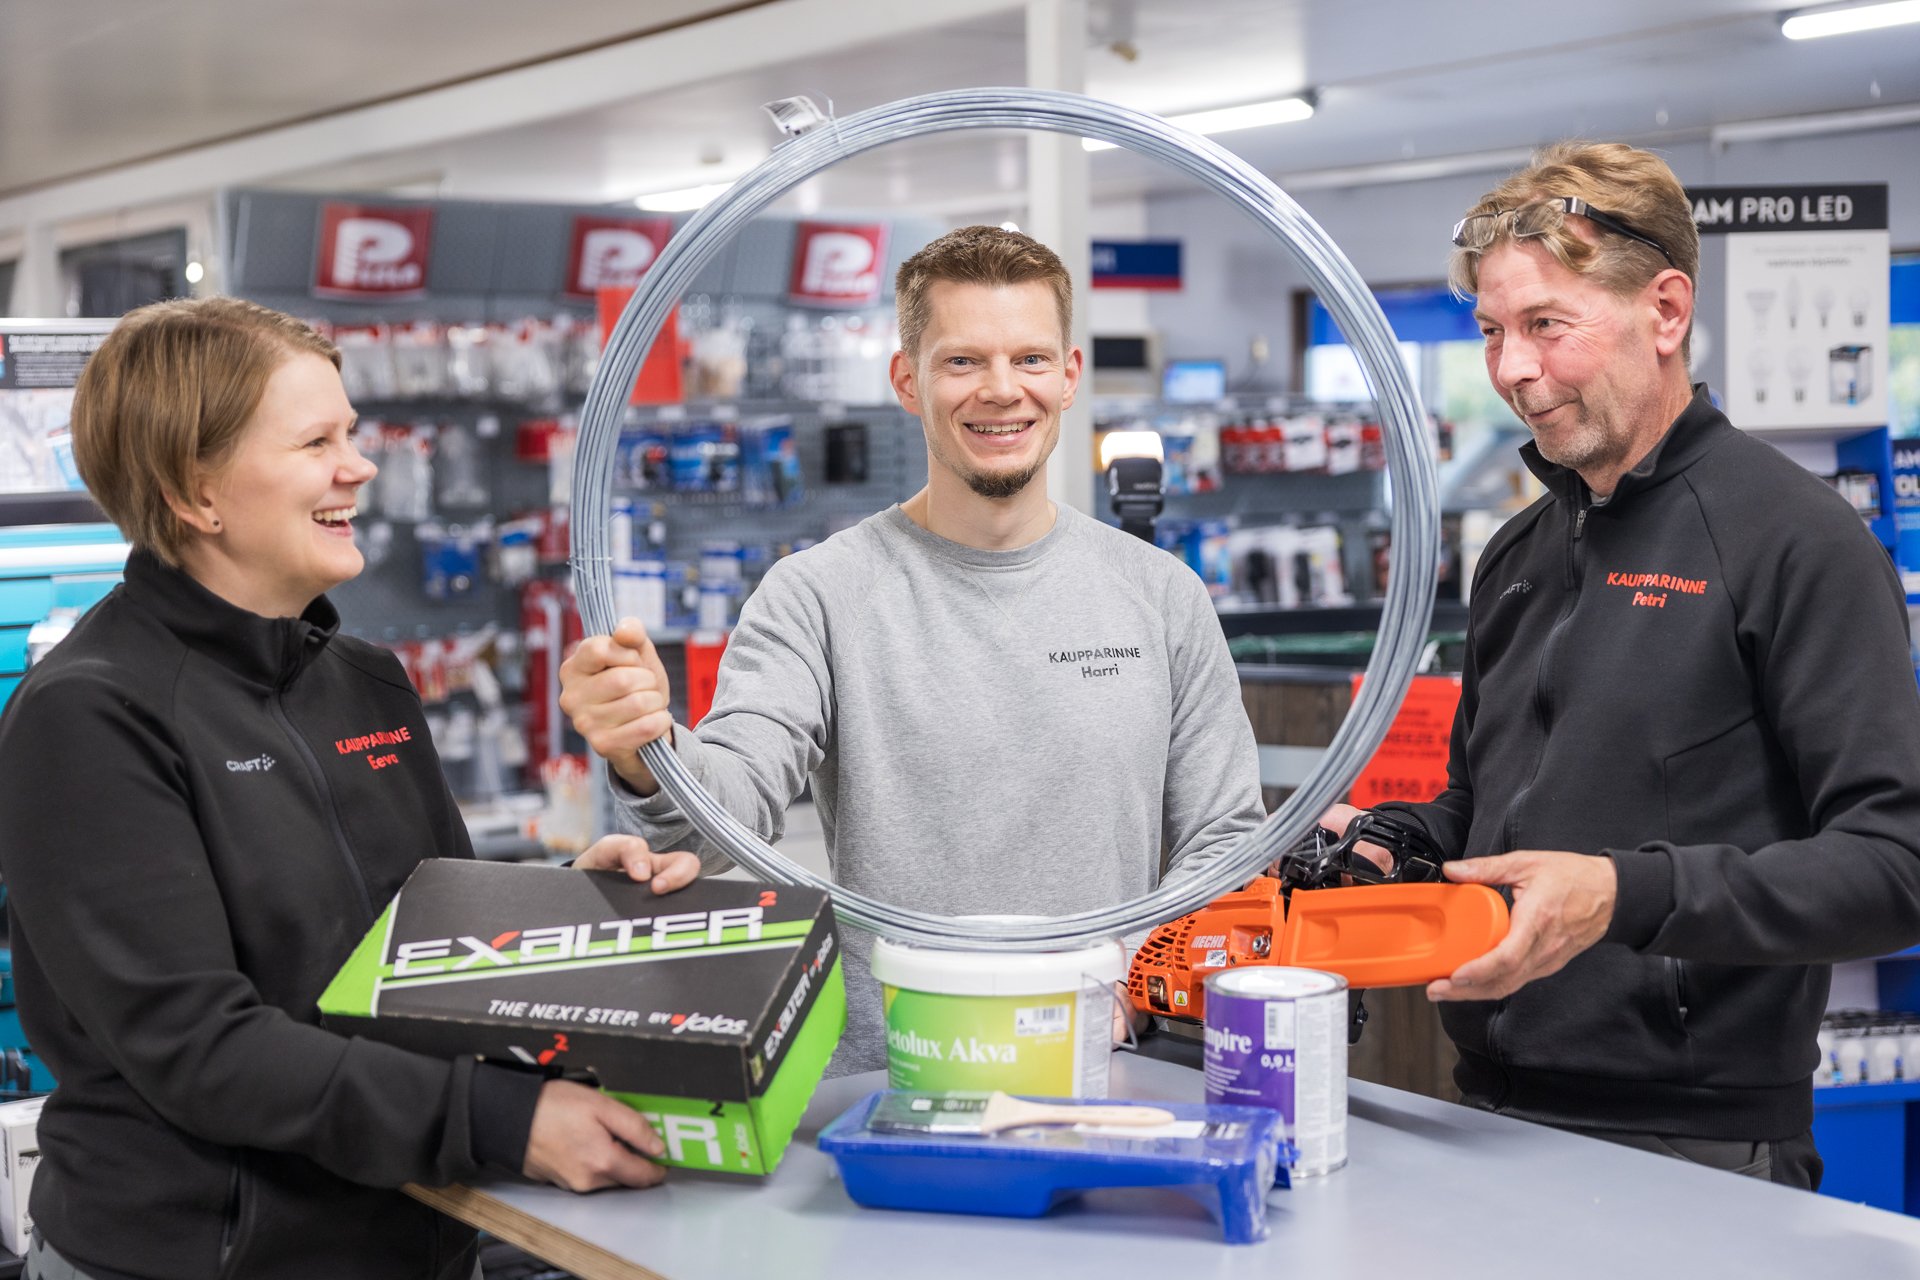 Kaupparinne Oy's entrepreneur and employees in their hardware store | Business Joensuu